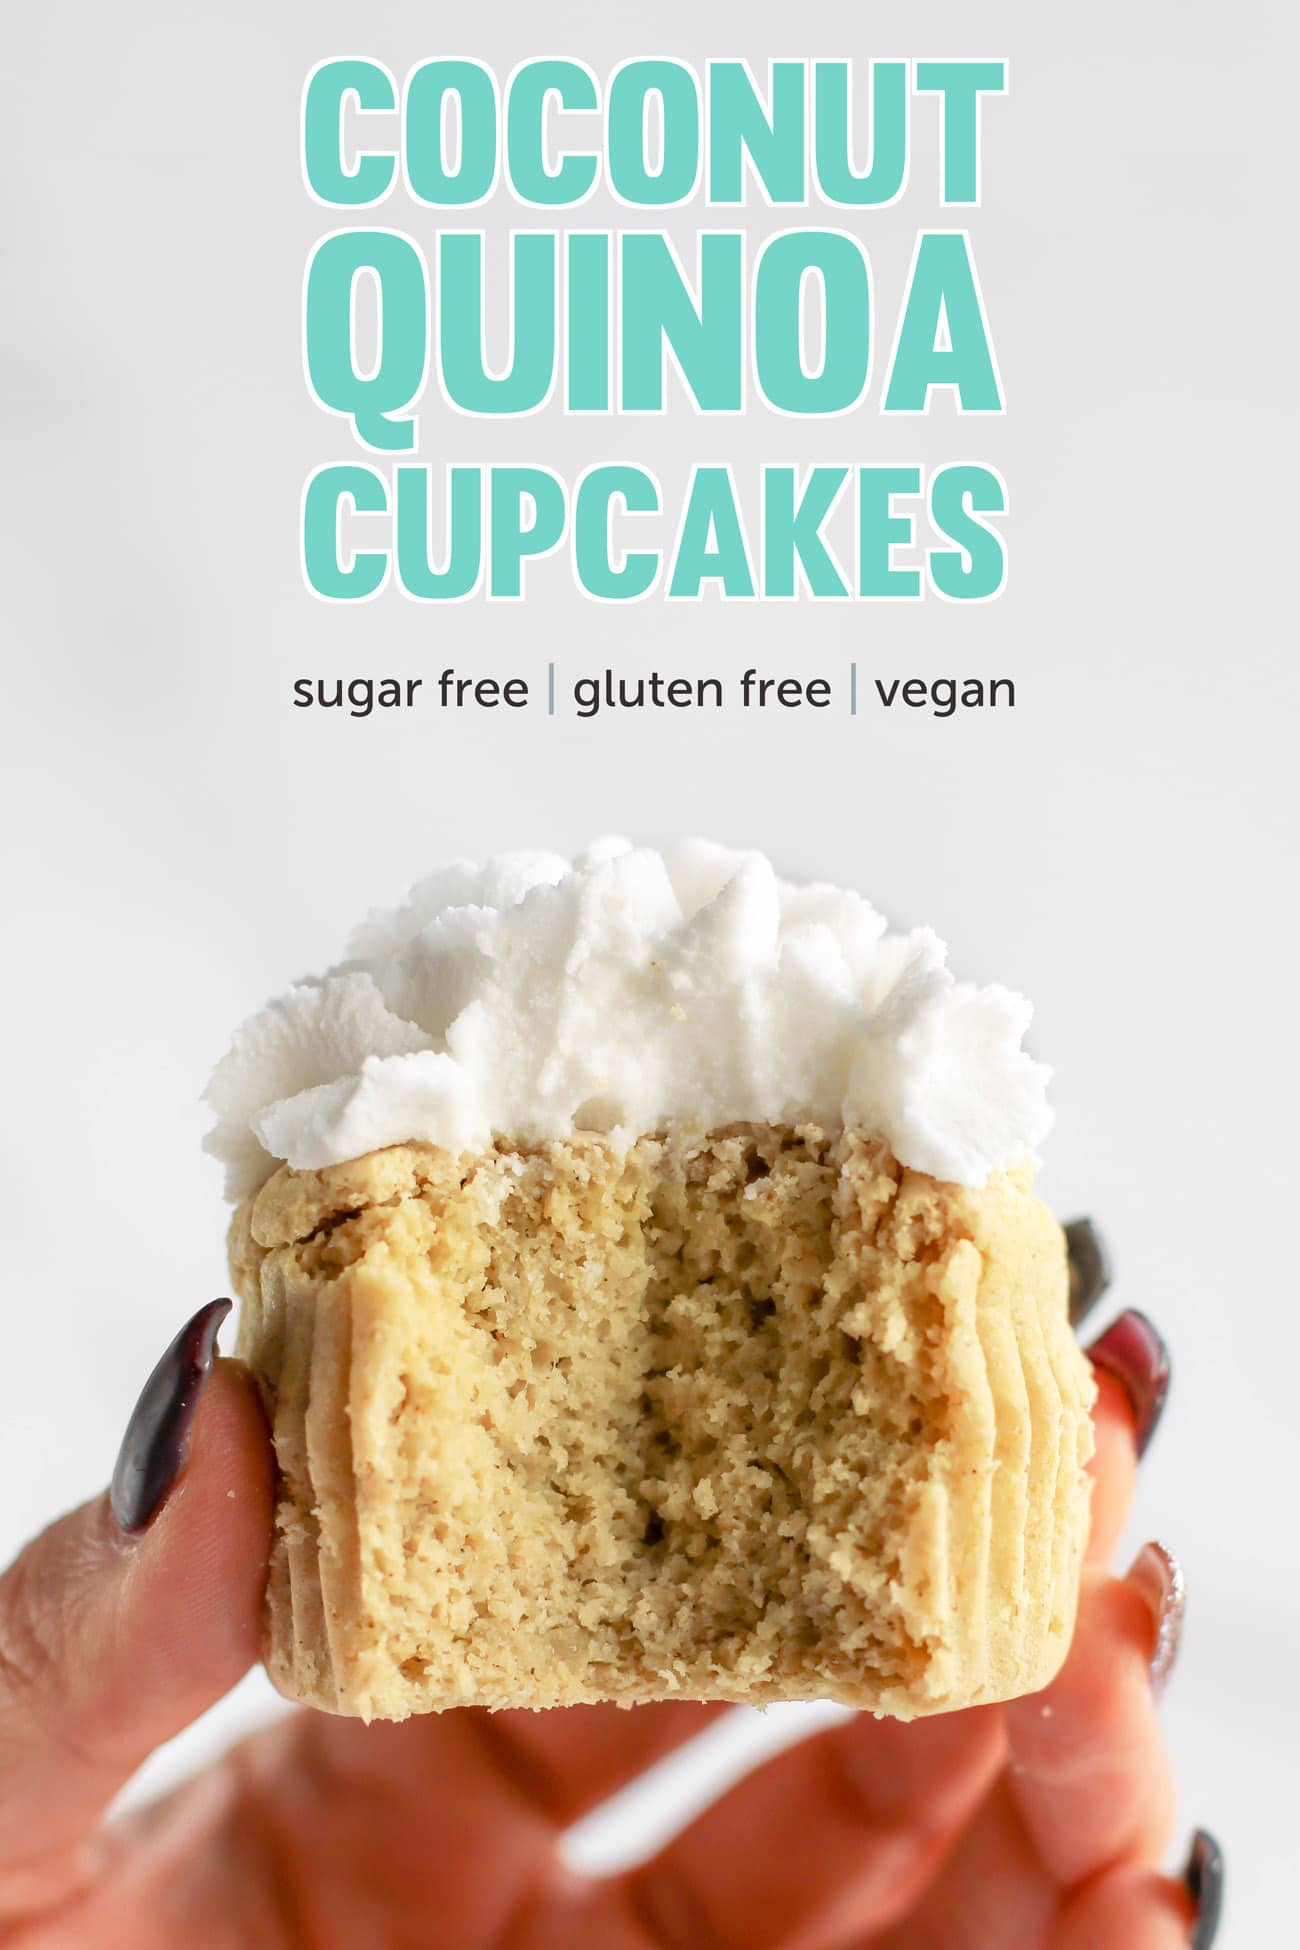 These Healthy Coconut Cupcakes are fluffy, springy, and moist! They're the most nutritious, guilt-free treat! Made with quinoa flour, sorghum flour, coconut yogurt, and coconut milk, so they're gluten free, dairy free, vegan, and sugar free!